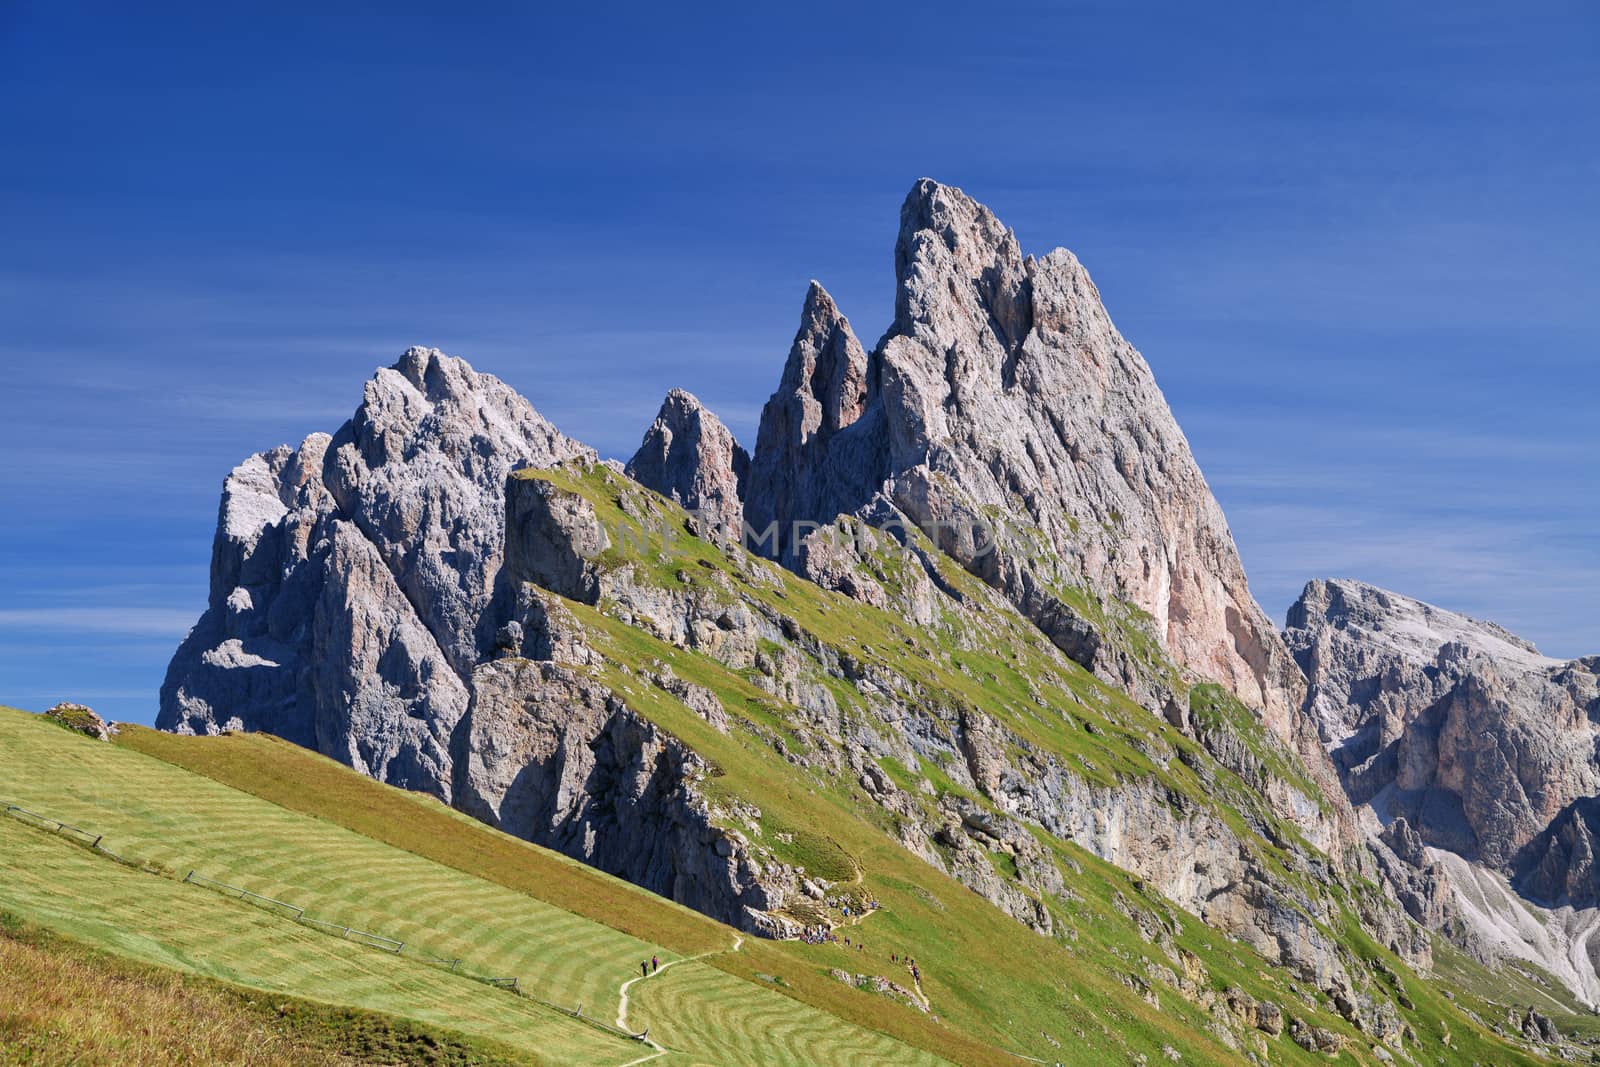 Seceda mountain on a sunny day, Dolomites, Italy